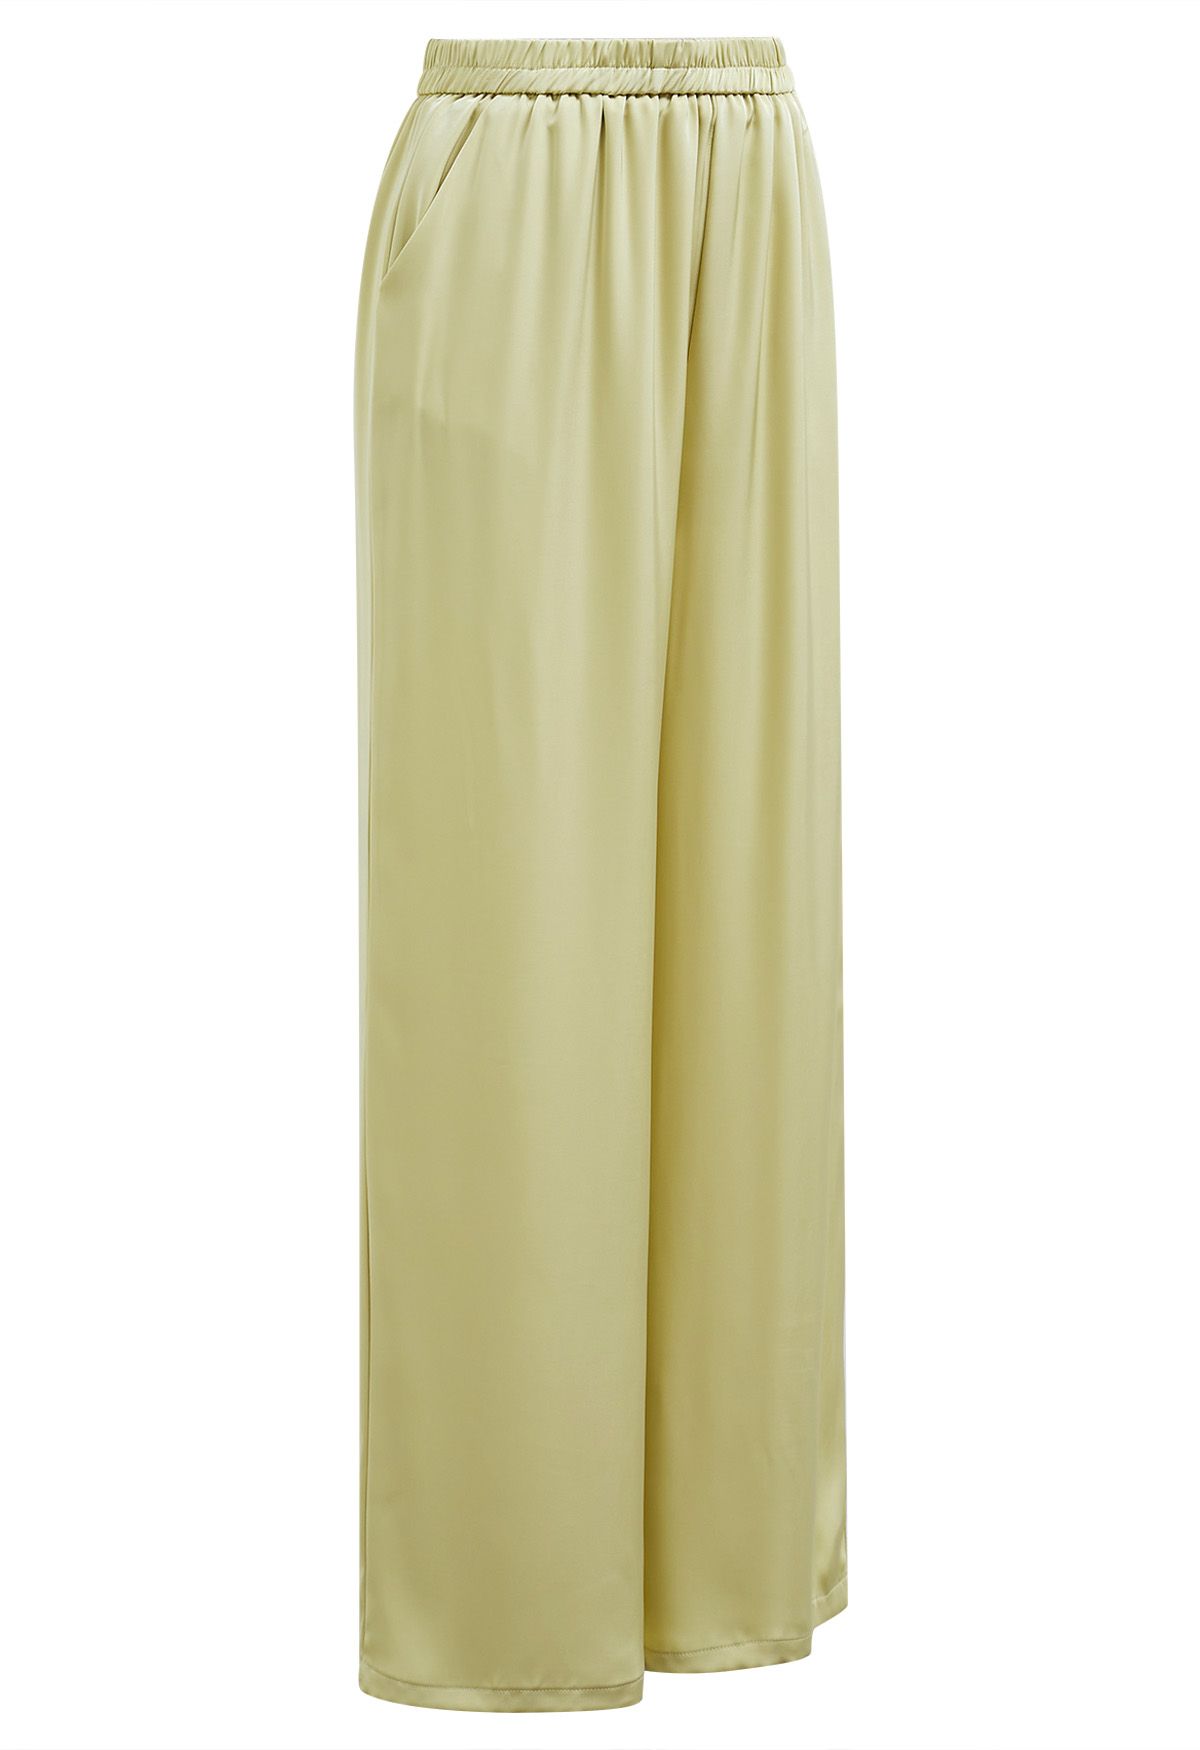 Satin Finish Pull-On Pants in Lime